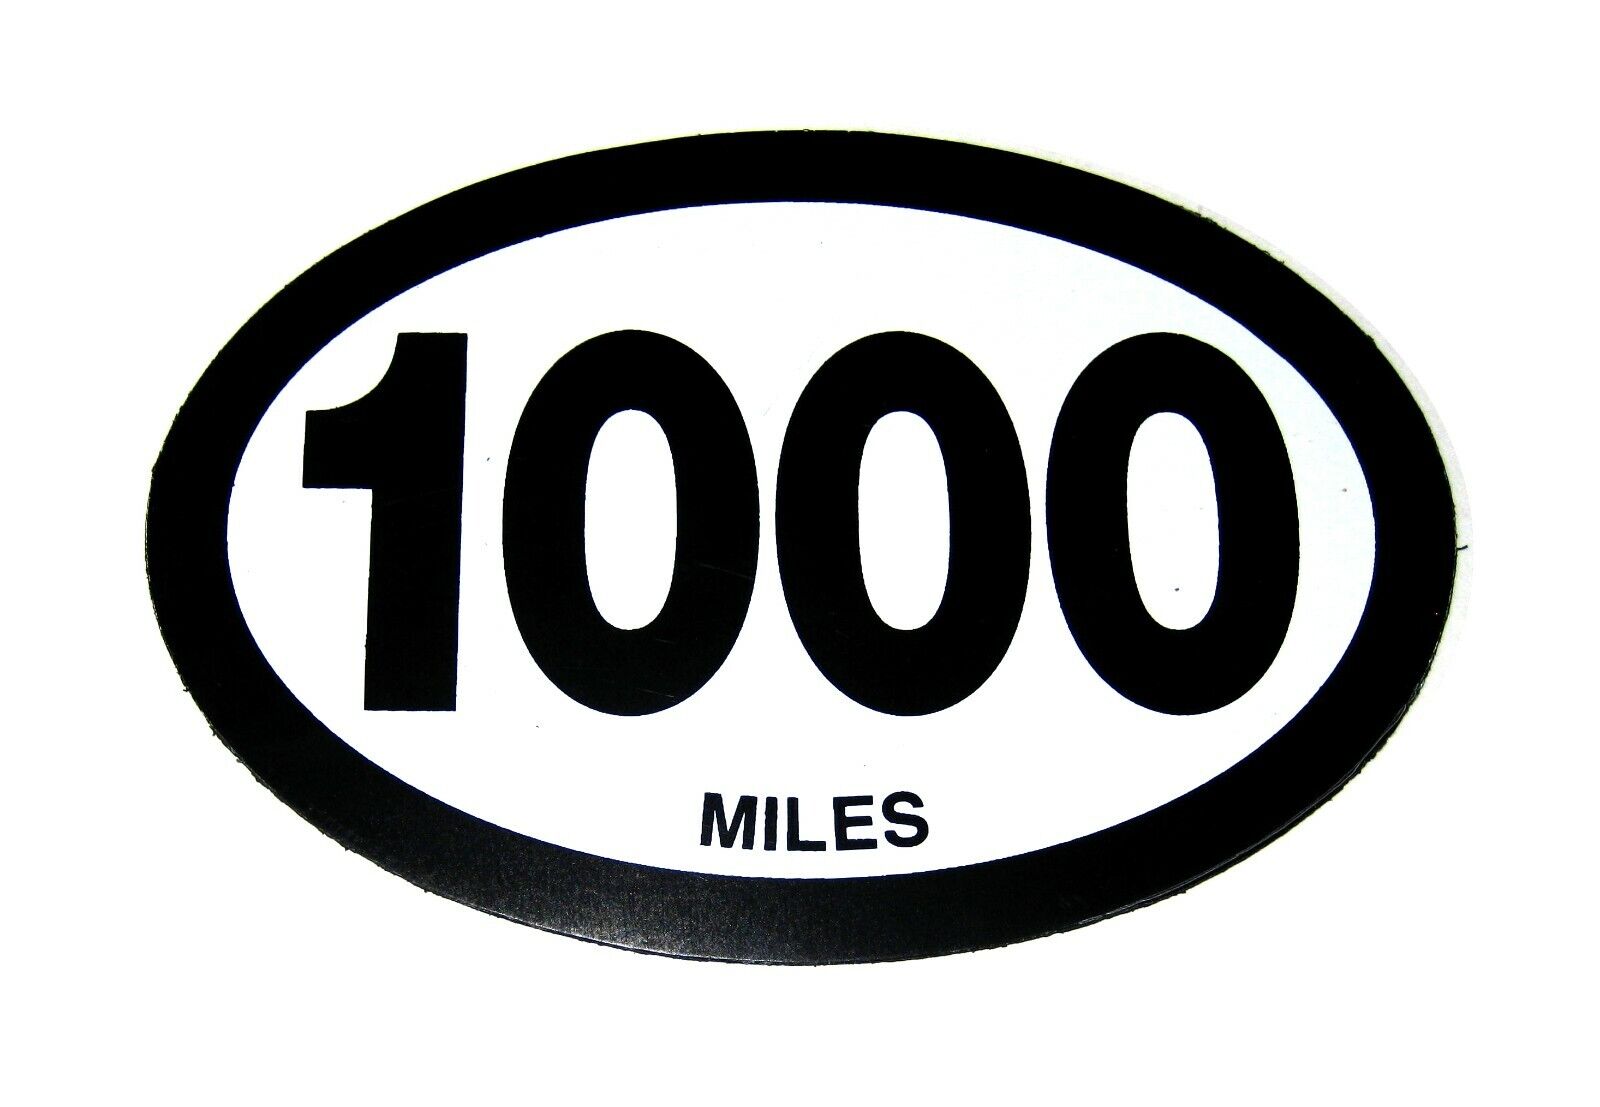 1000 MILES MAGNET Running Challenge Oval Run Jogging Hiking Car Decal Bumper